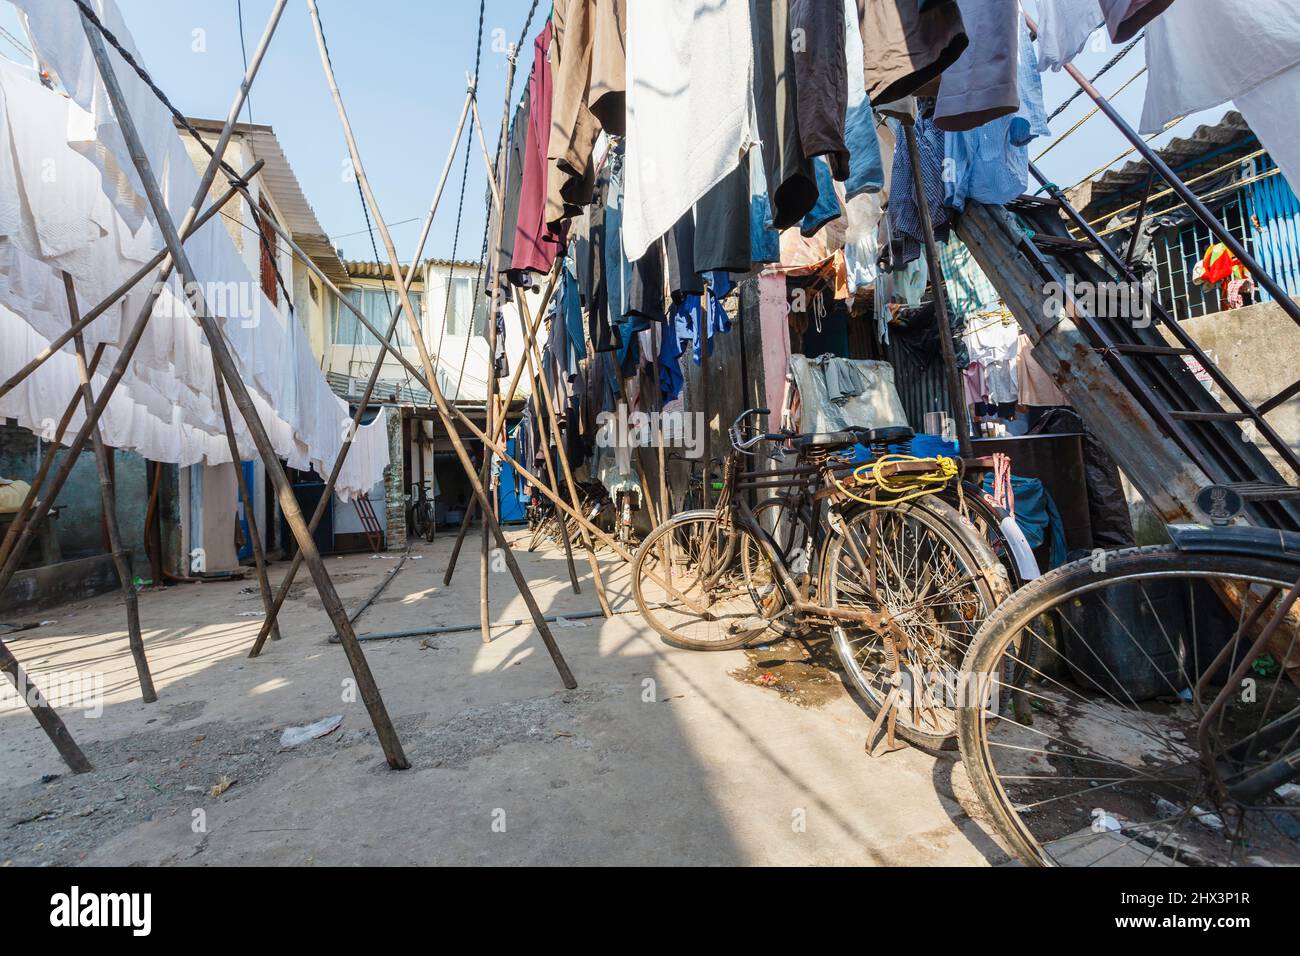 Bicycles with clean fresh clothes and towels hanging out to dry in the open air in Mahalaxmi Dhobi Ghat, a large open air laundromat in Mumbai, India Stock Photo